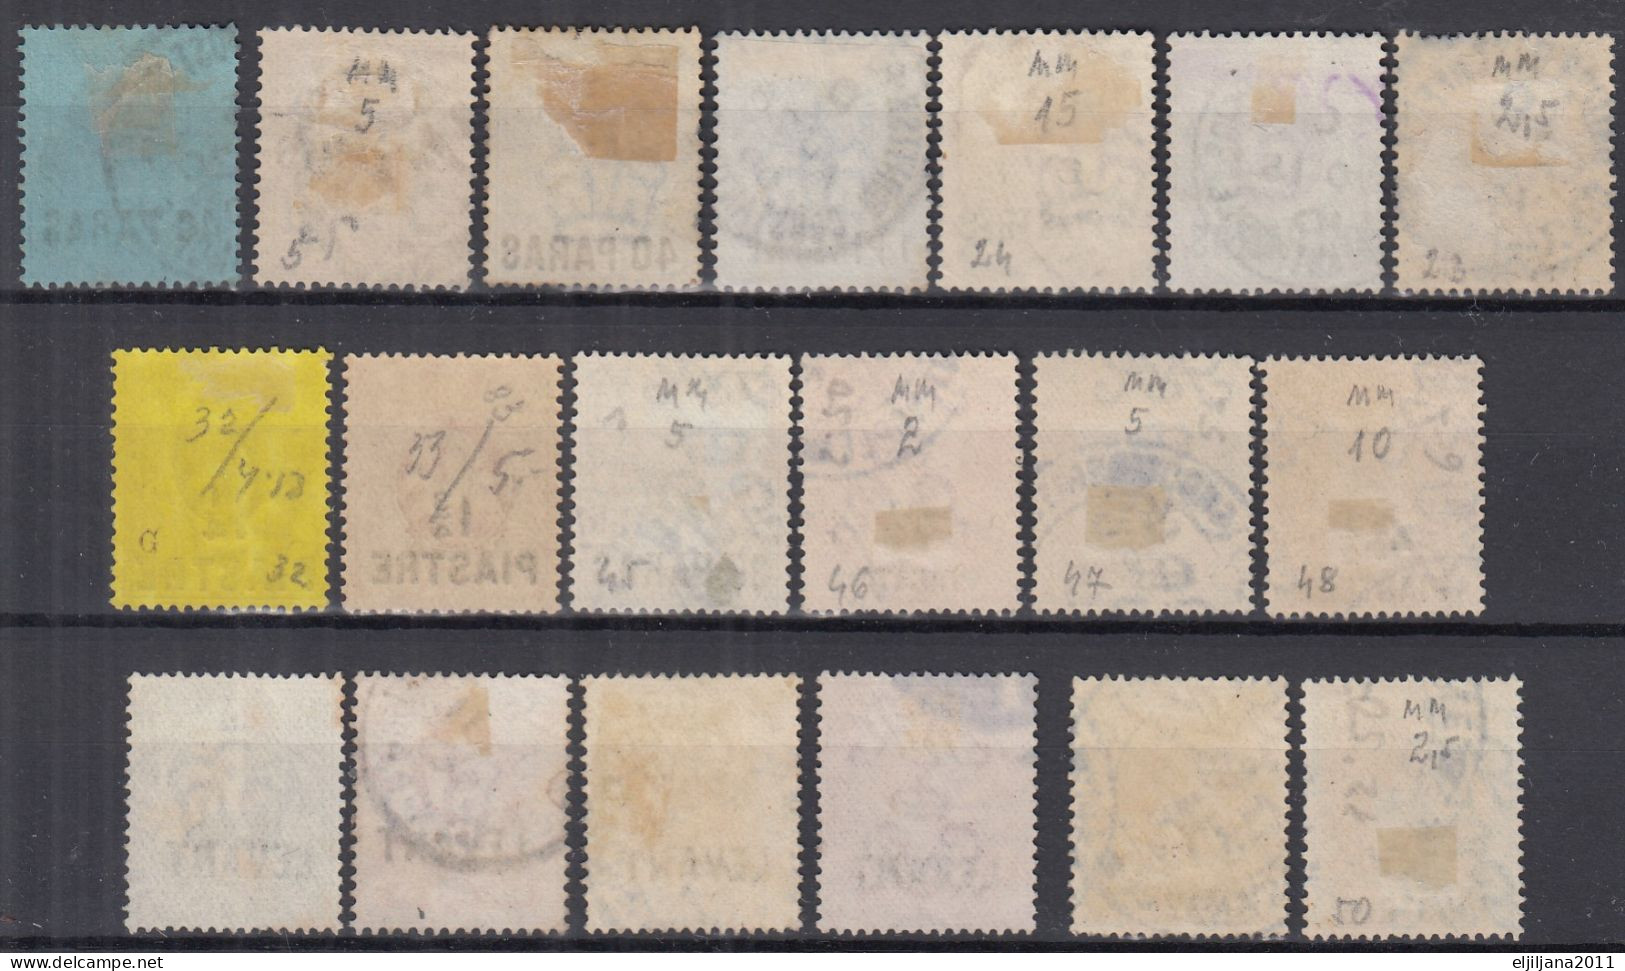 Action !! SALE !! 50 % OFF !! ⁕ British LEVANT 1887 - 1921 ⁕ Overprint PARAS & PIASTERS ⁕ 19v Used & MH - Levante Británica